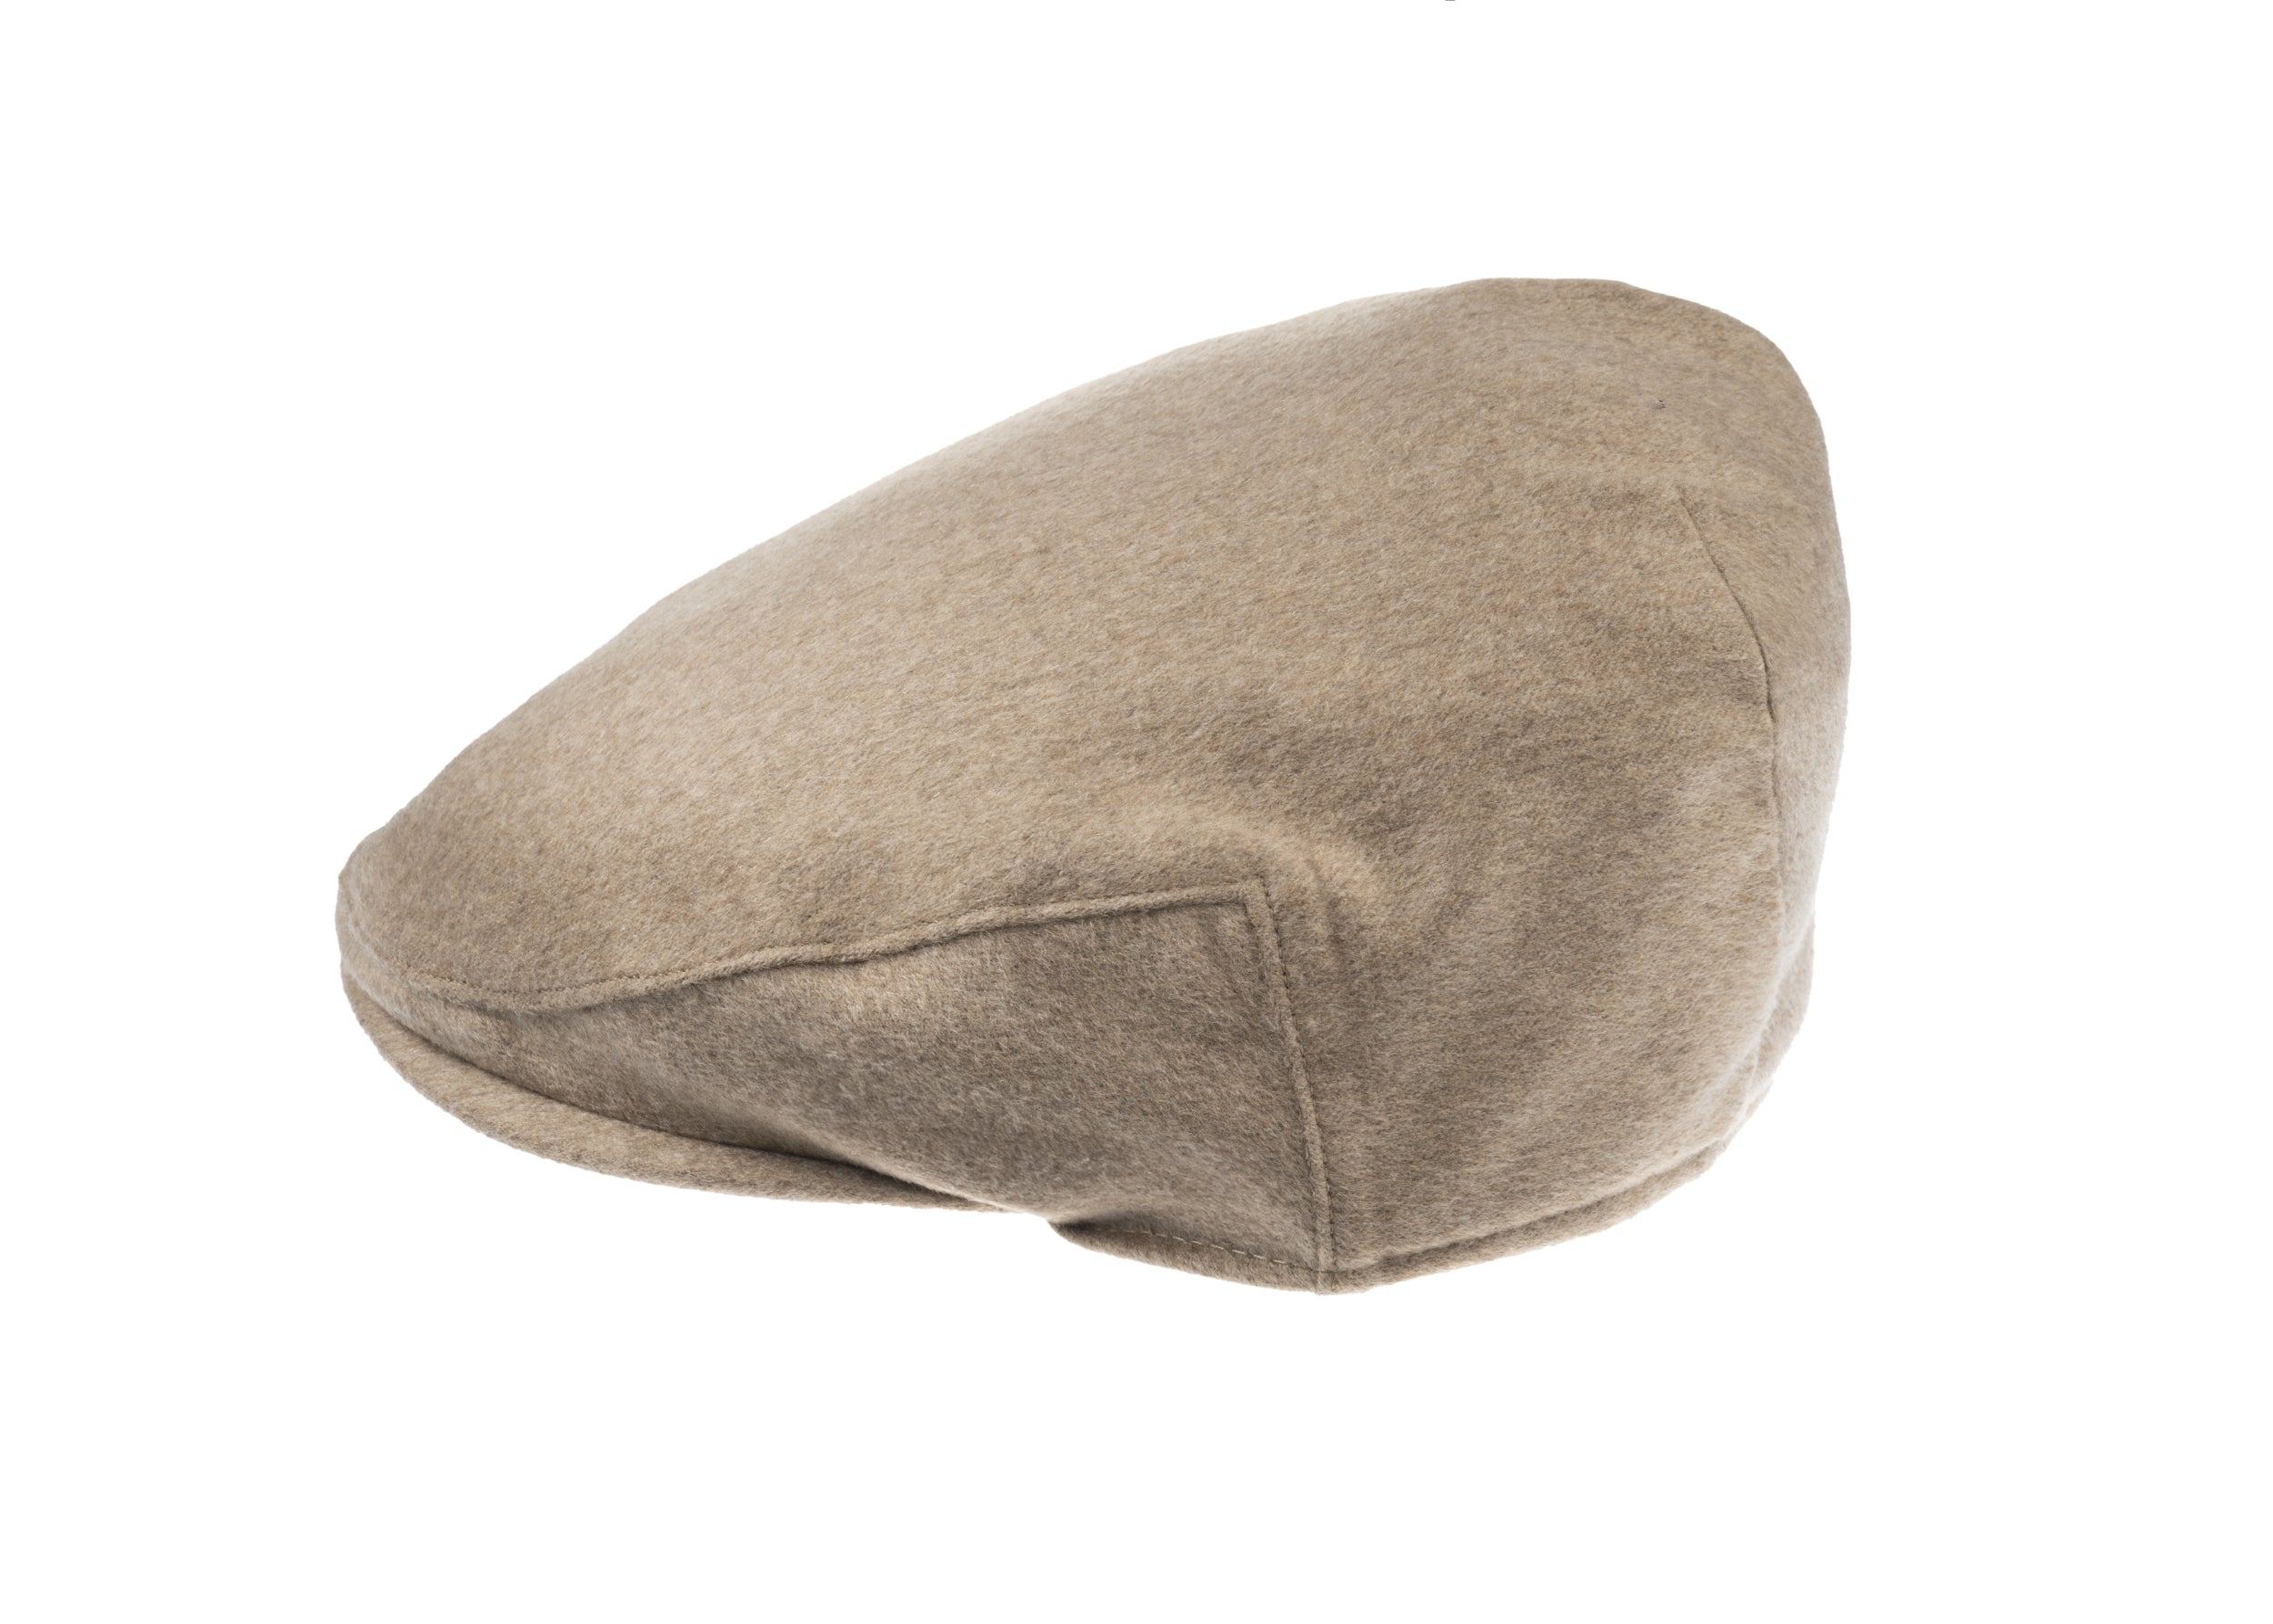 Christys' x Johnstons of Elgin Cashmere Made in England Balmoral Cap in Camel